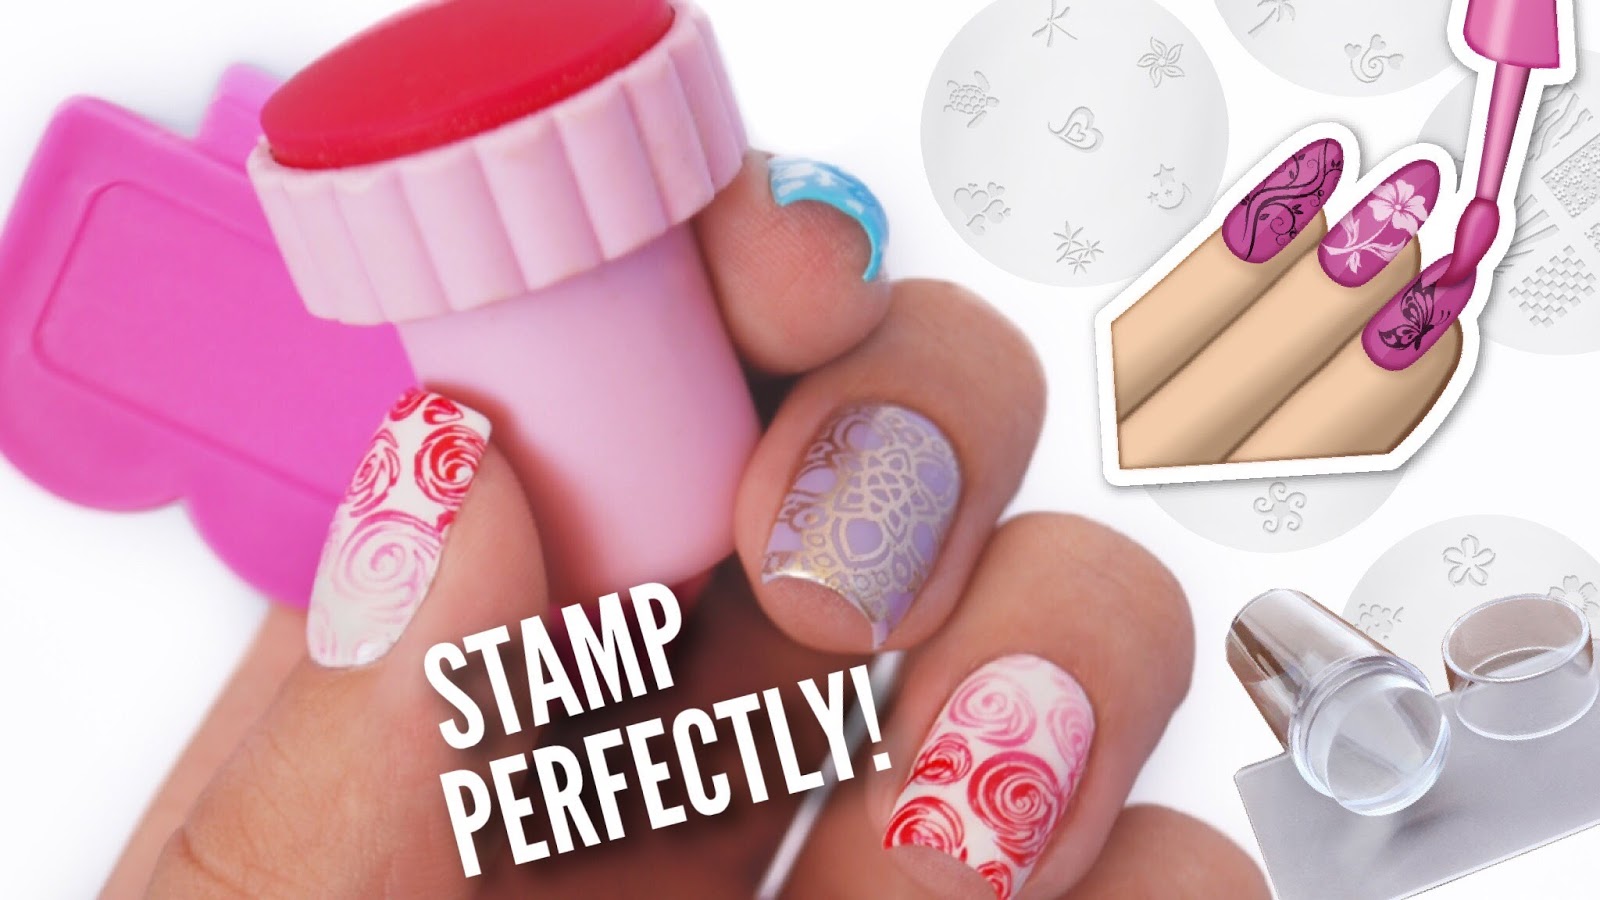 7. "Nail Art Playing Cards" by Clear Jelly Stamper - wide 2